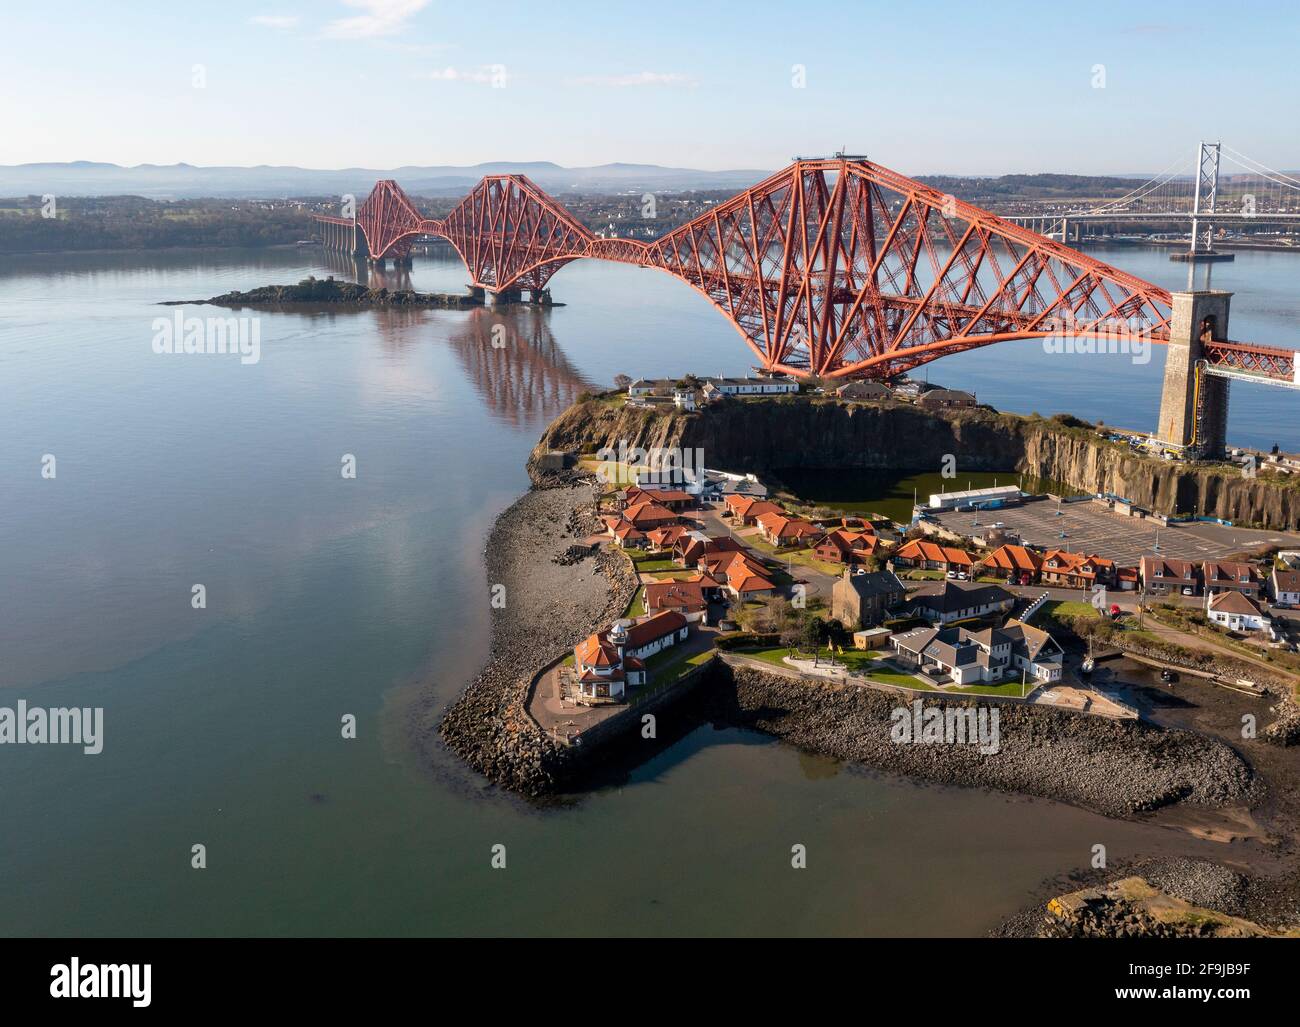 Aerial view of the Forth Rail Bridge at North Queensferry. The bridge completed in 1889 spans the Firth of Forth between North and South Queensferry. Stock Photo